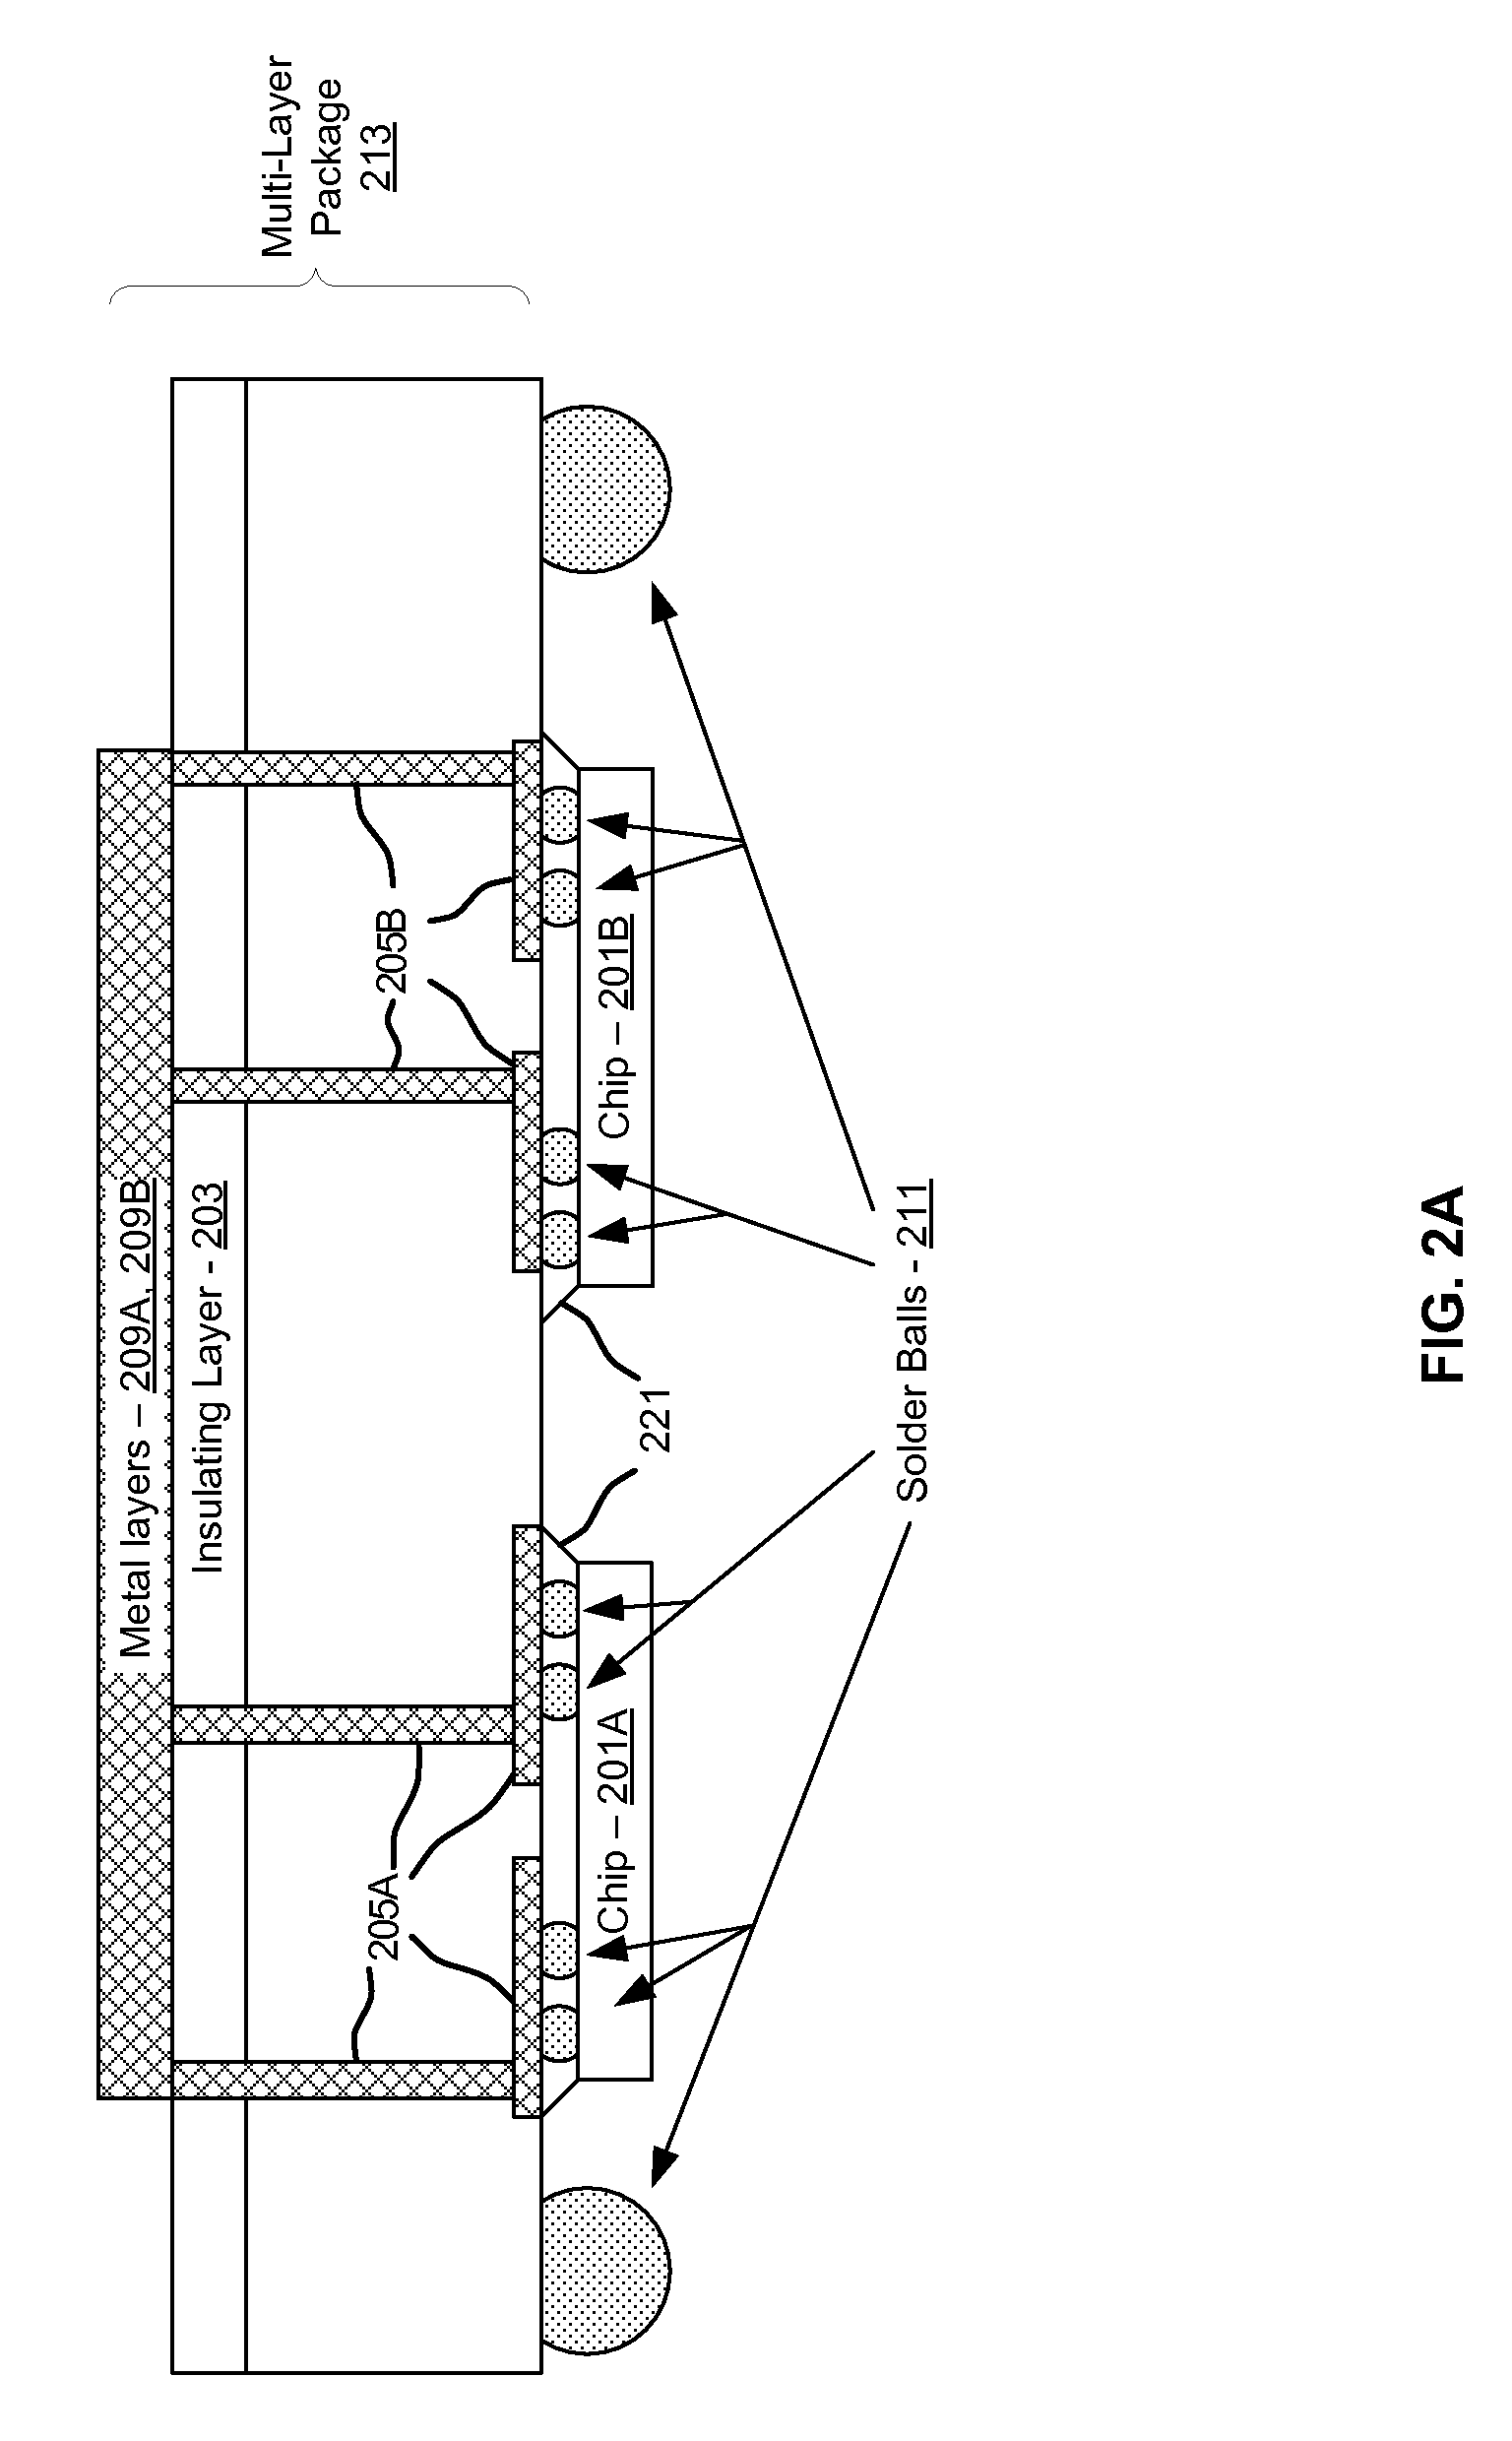 Method and system for inter-chip communication via integrated circuit package waveguides